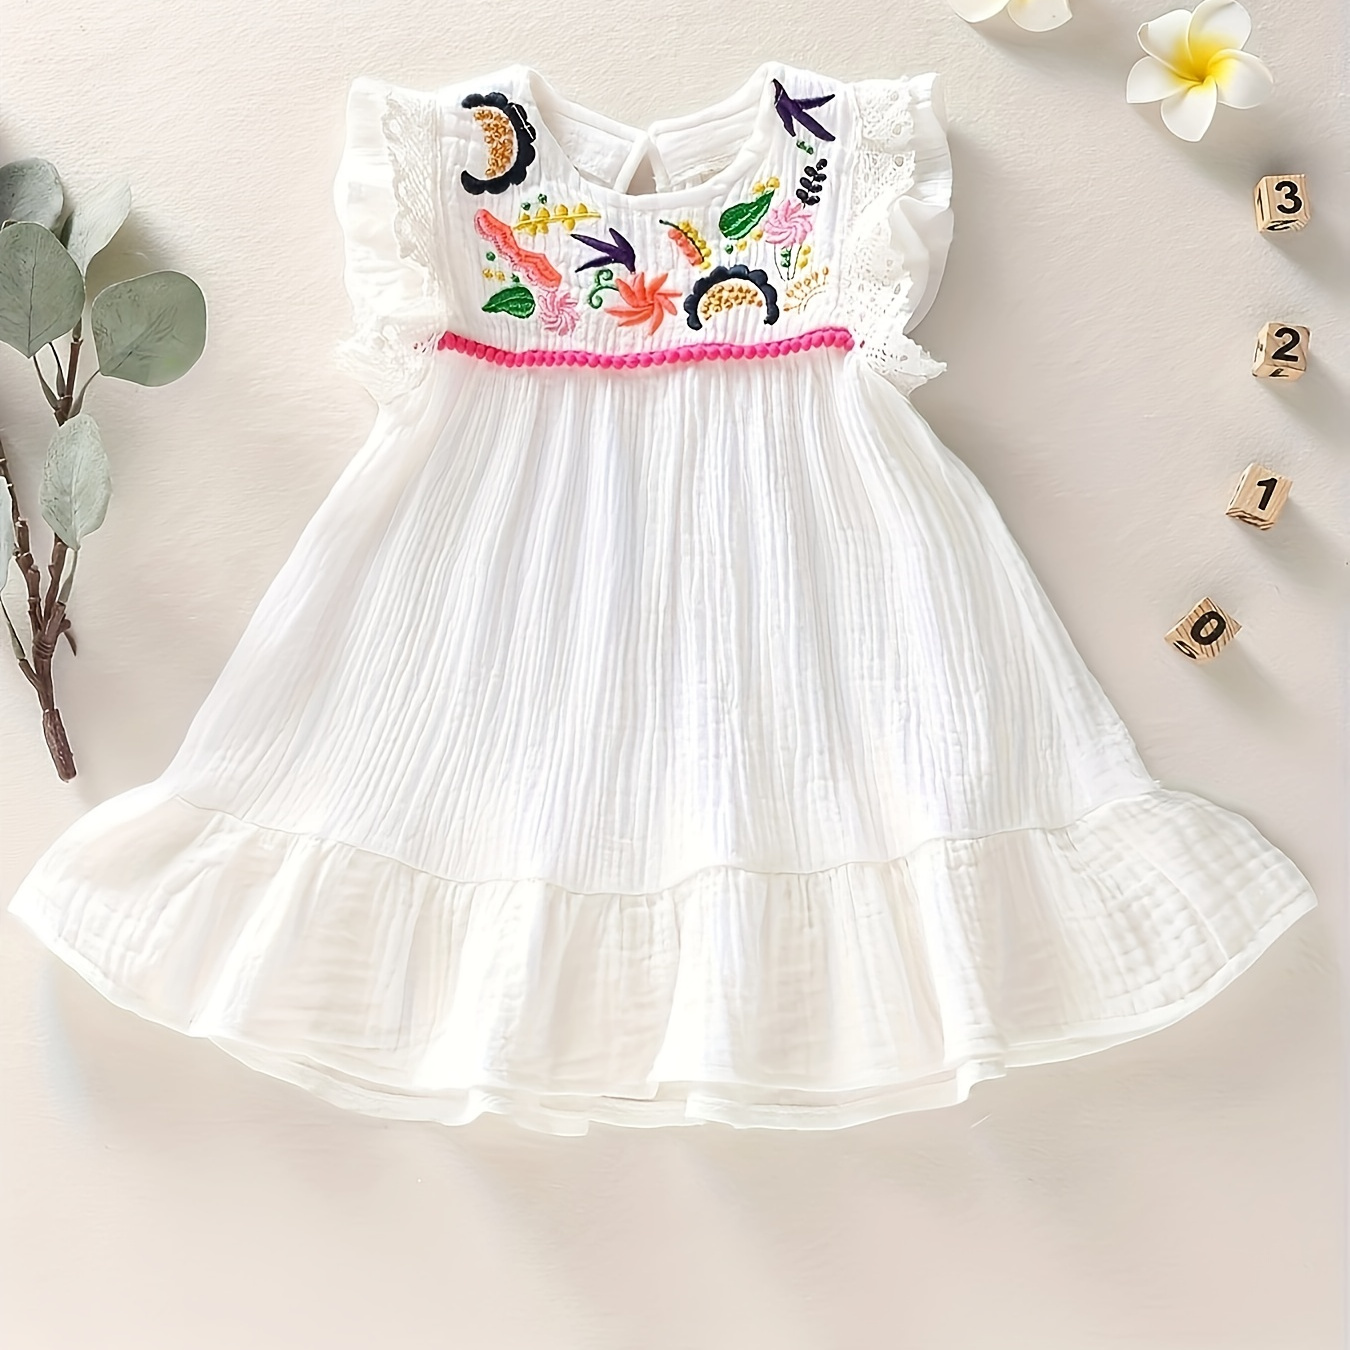 

Baby's Colorful Ethnic Pattern Embroidered Cotton Muslin Dress, Casual Ruffle Trim Cap Sleeve Dress, Infant & Toddler Girl's Clothing For Summer/spring, As Gift